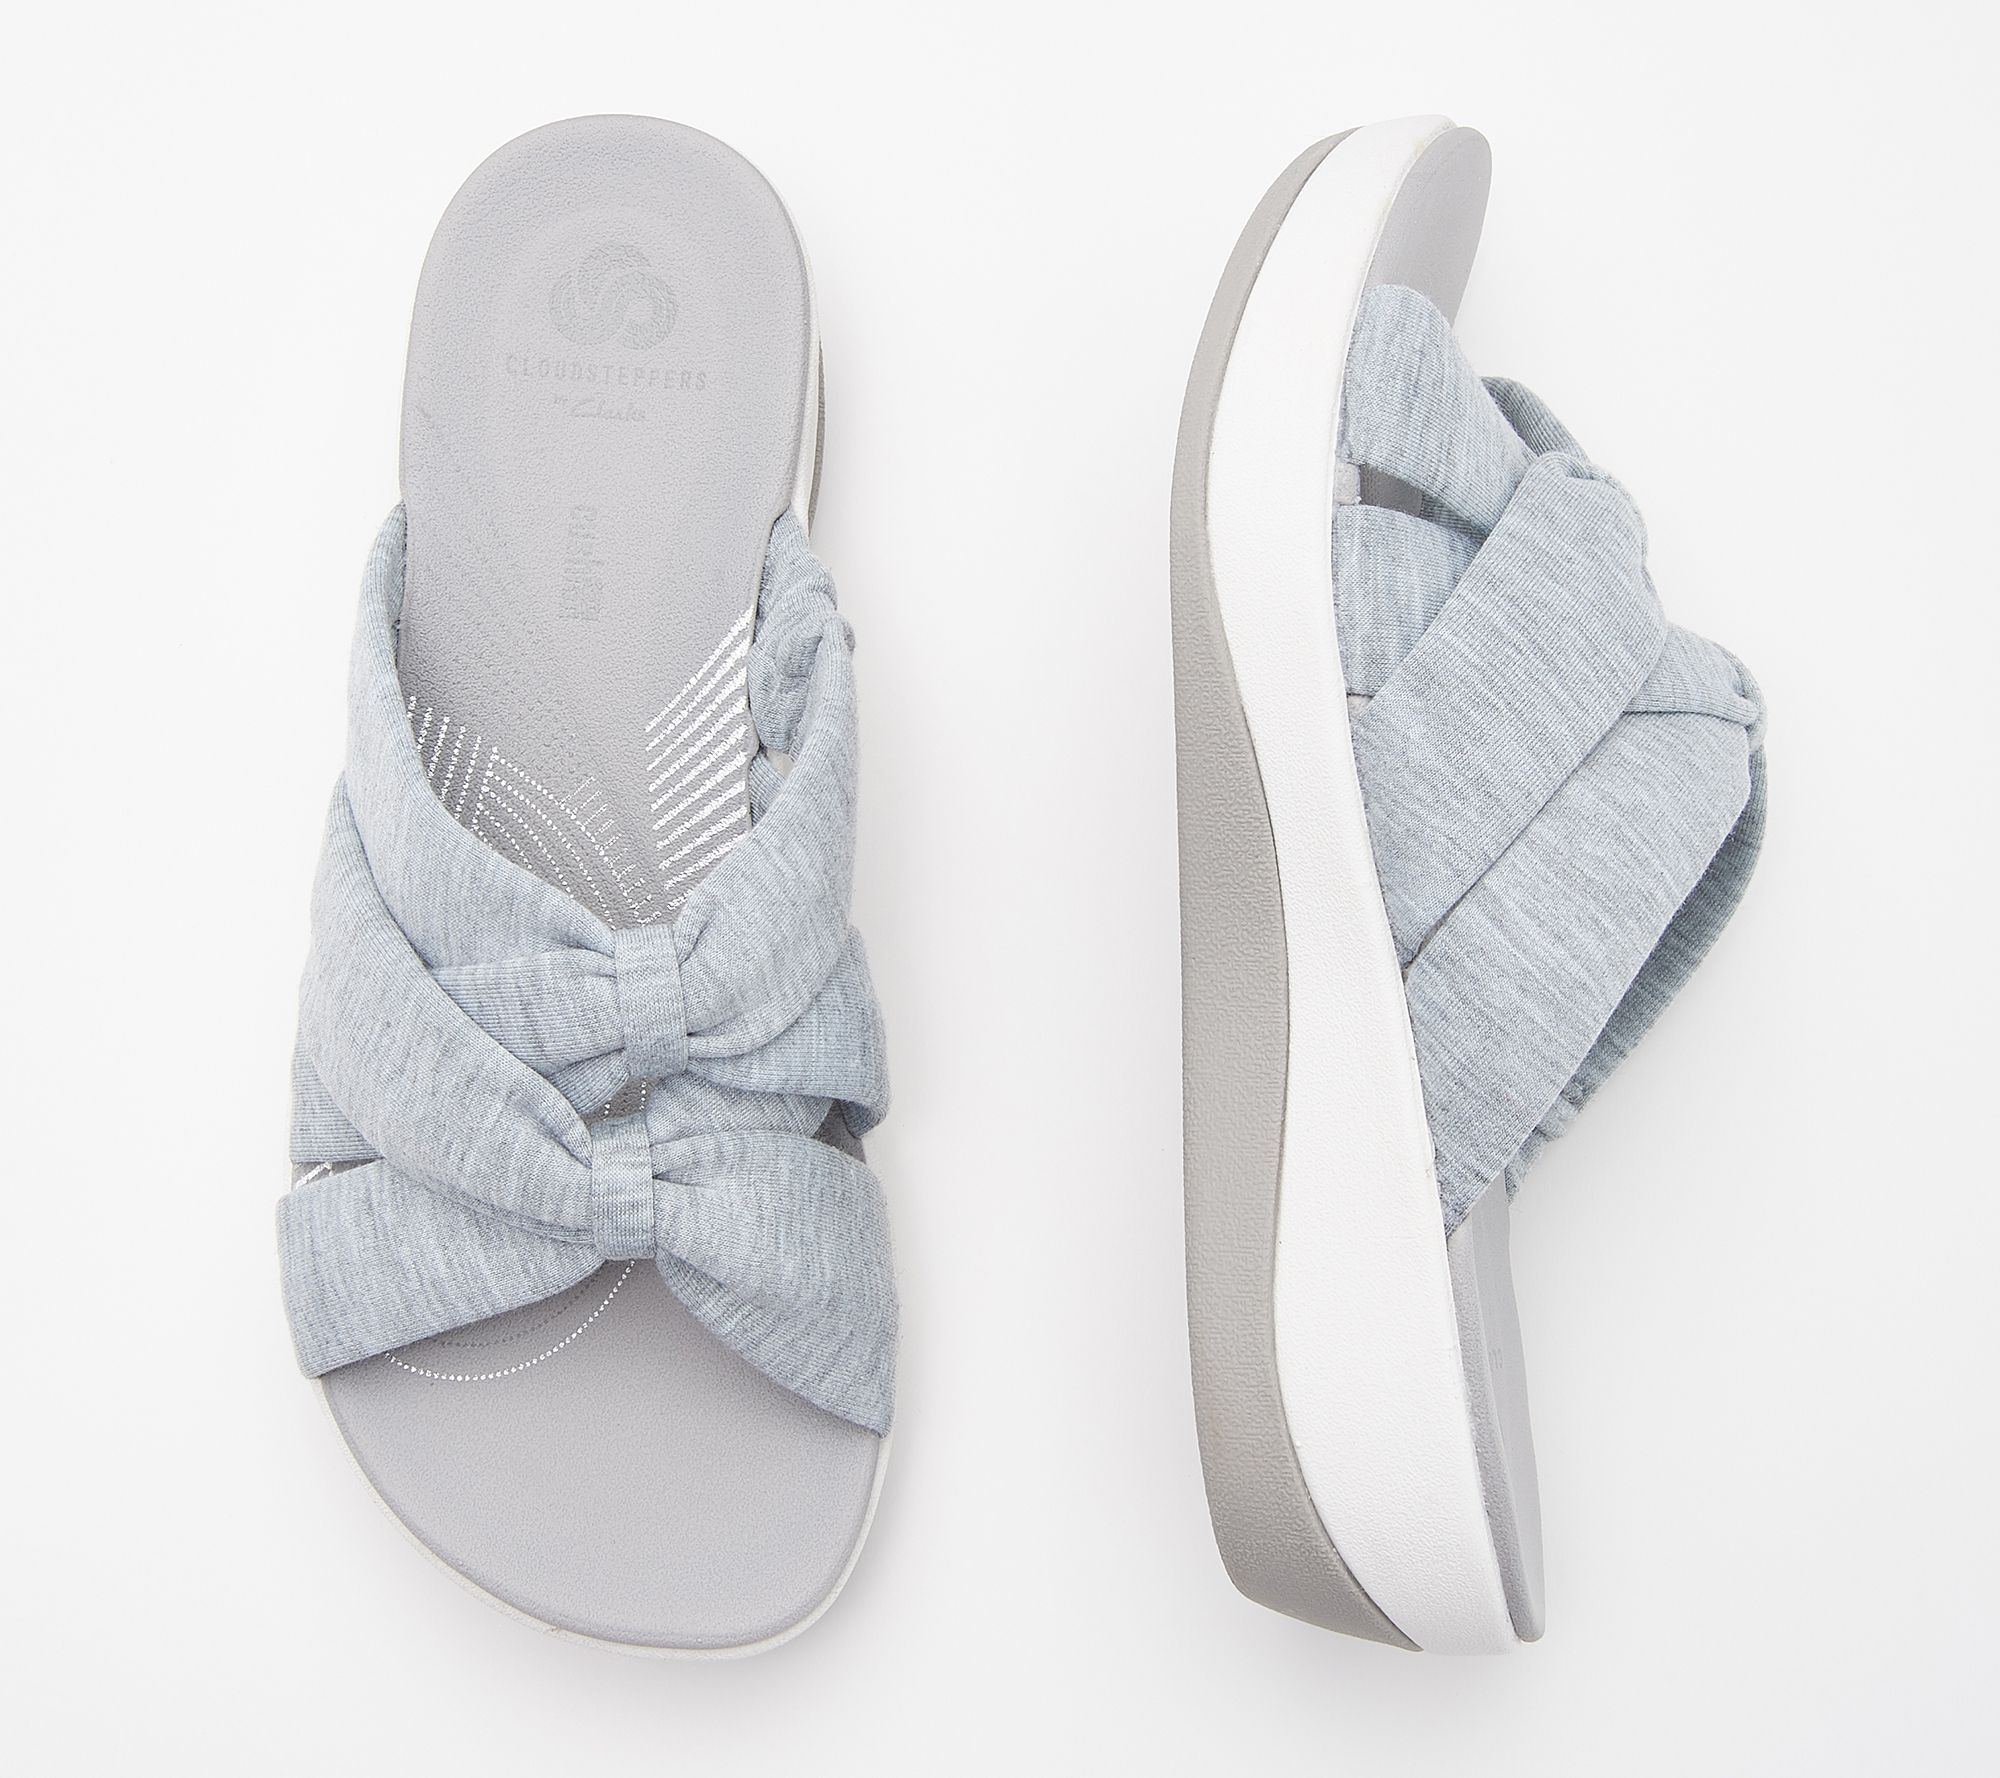 CLOUDSTEPPERS by Clarks Jersey Slide 